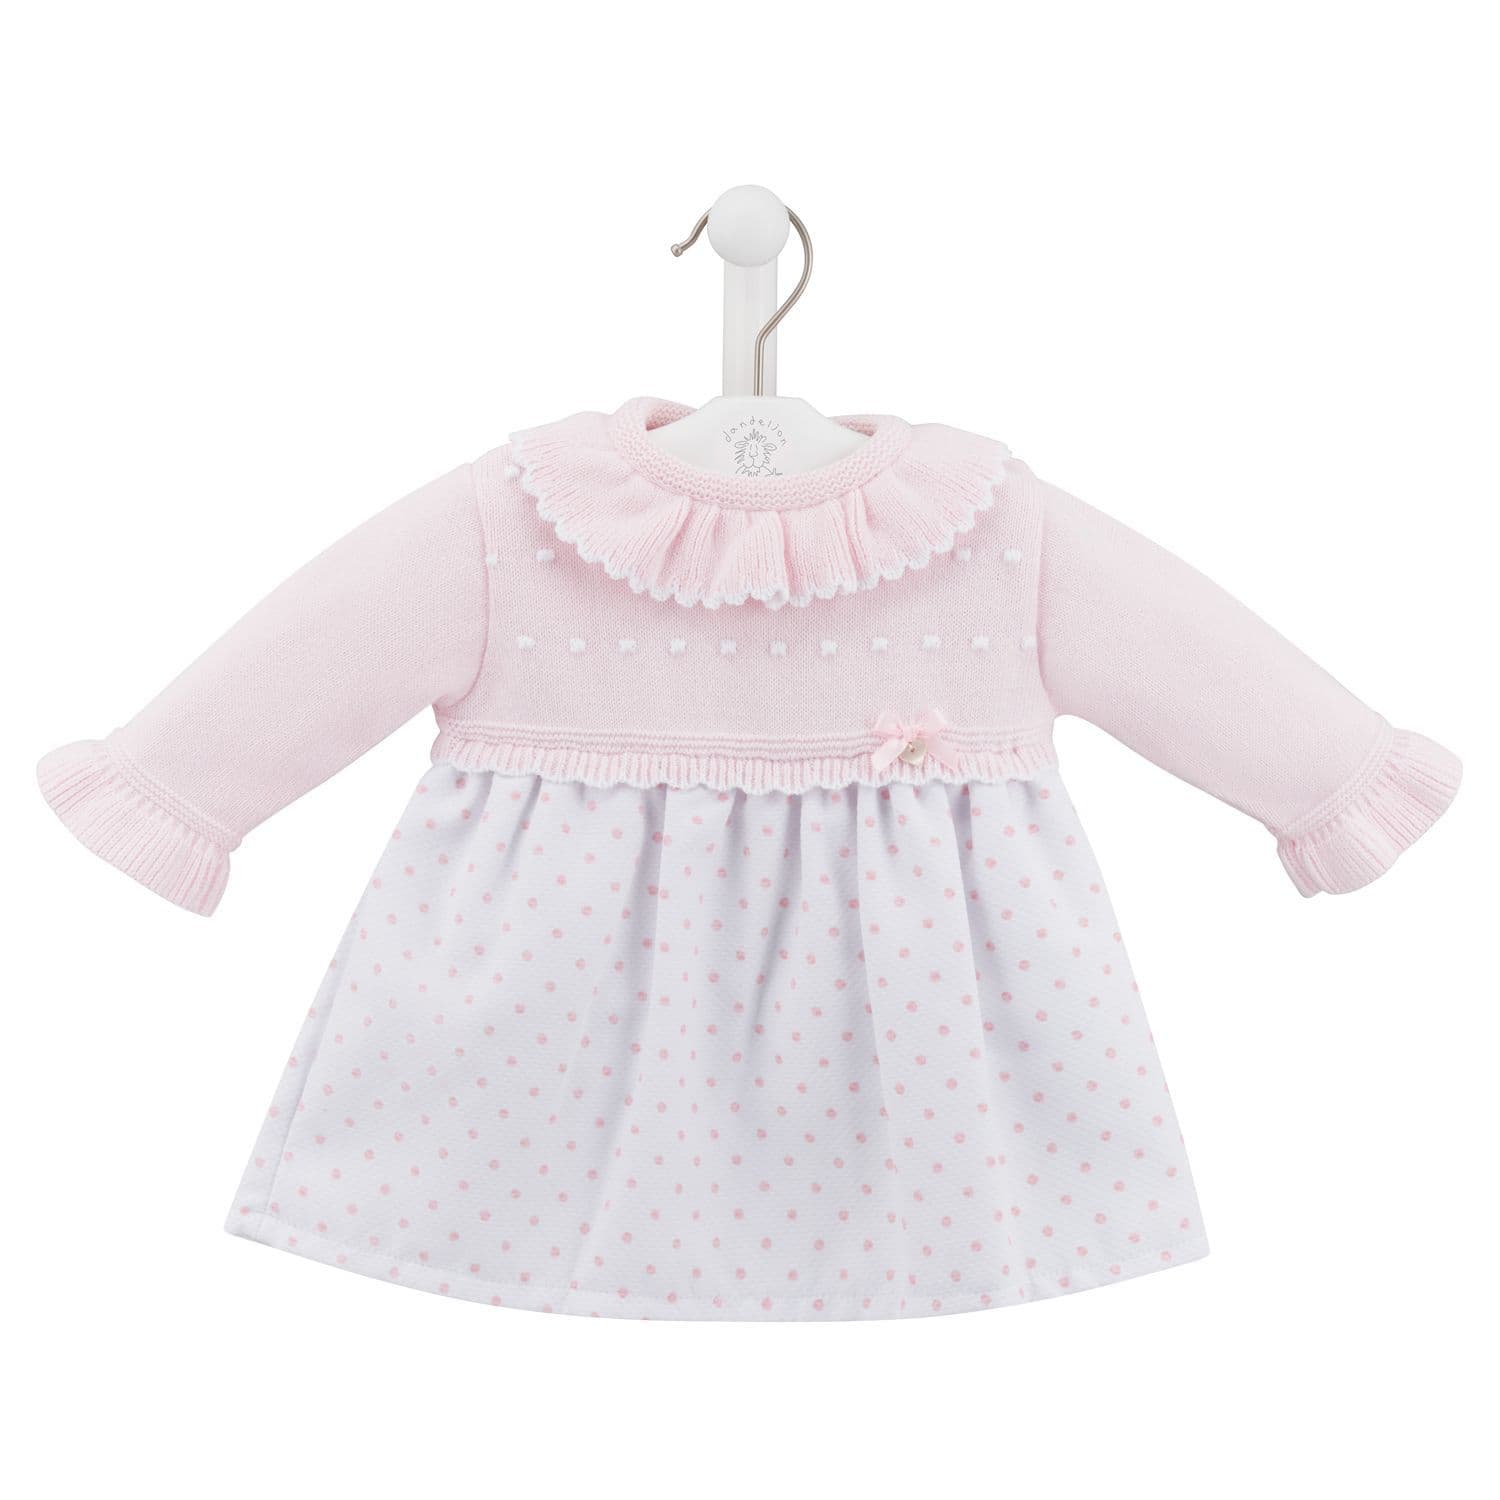 Dandelion Pink Spotty Dress with Knitted Top